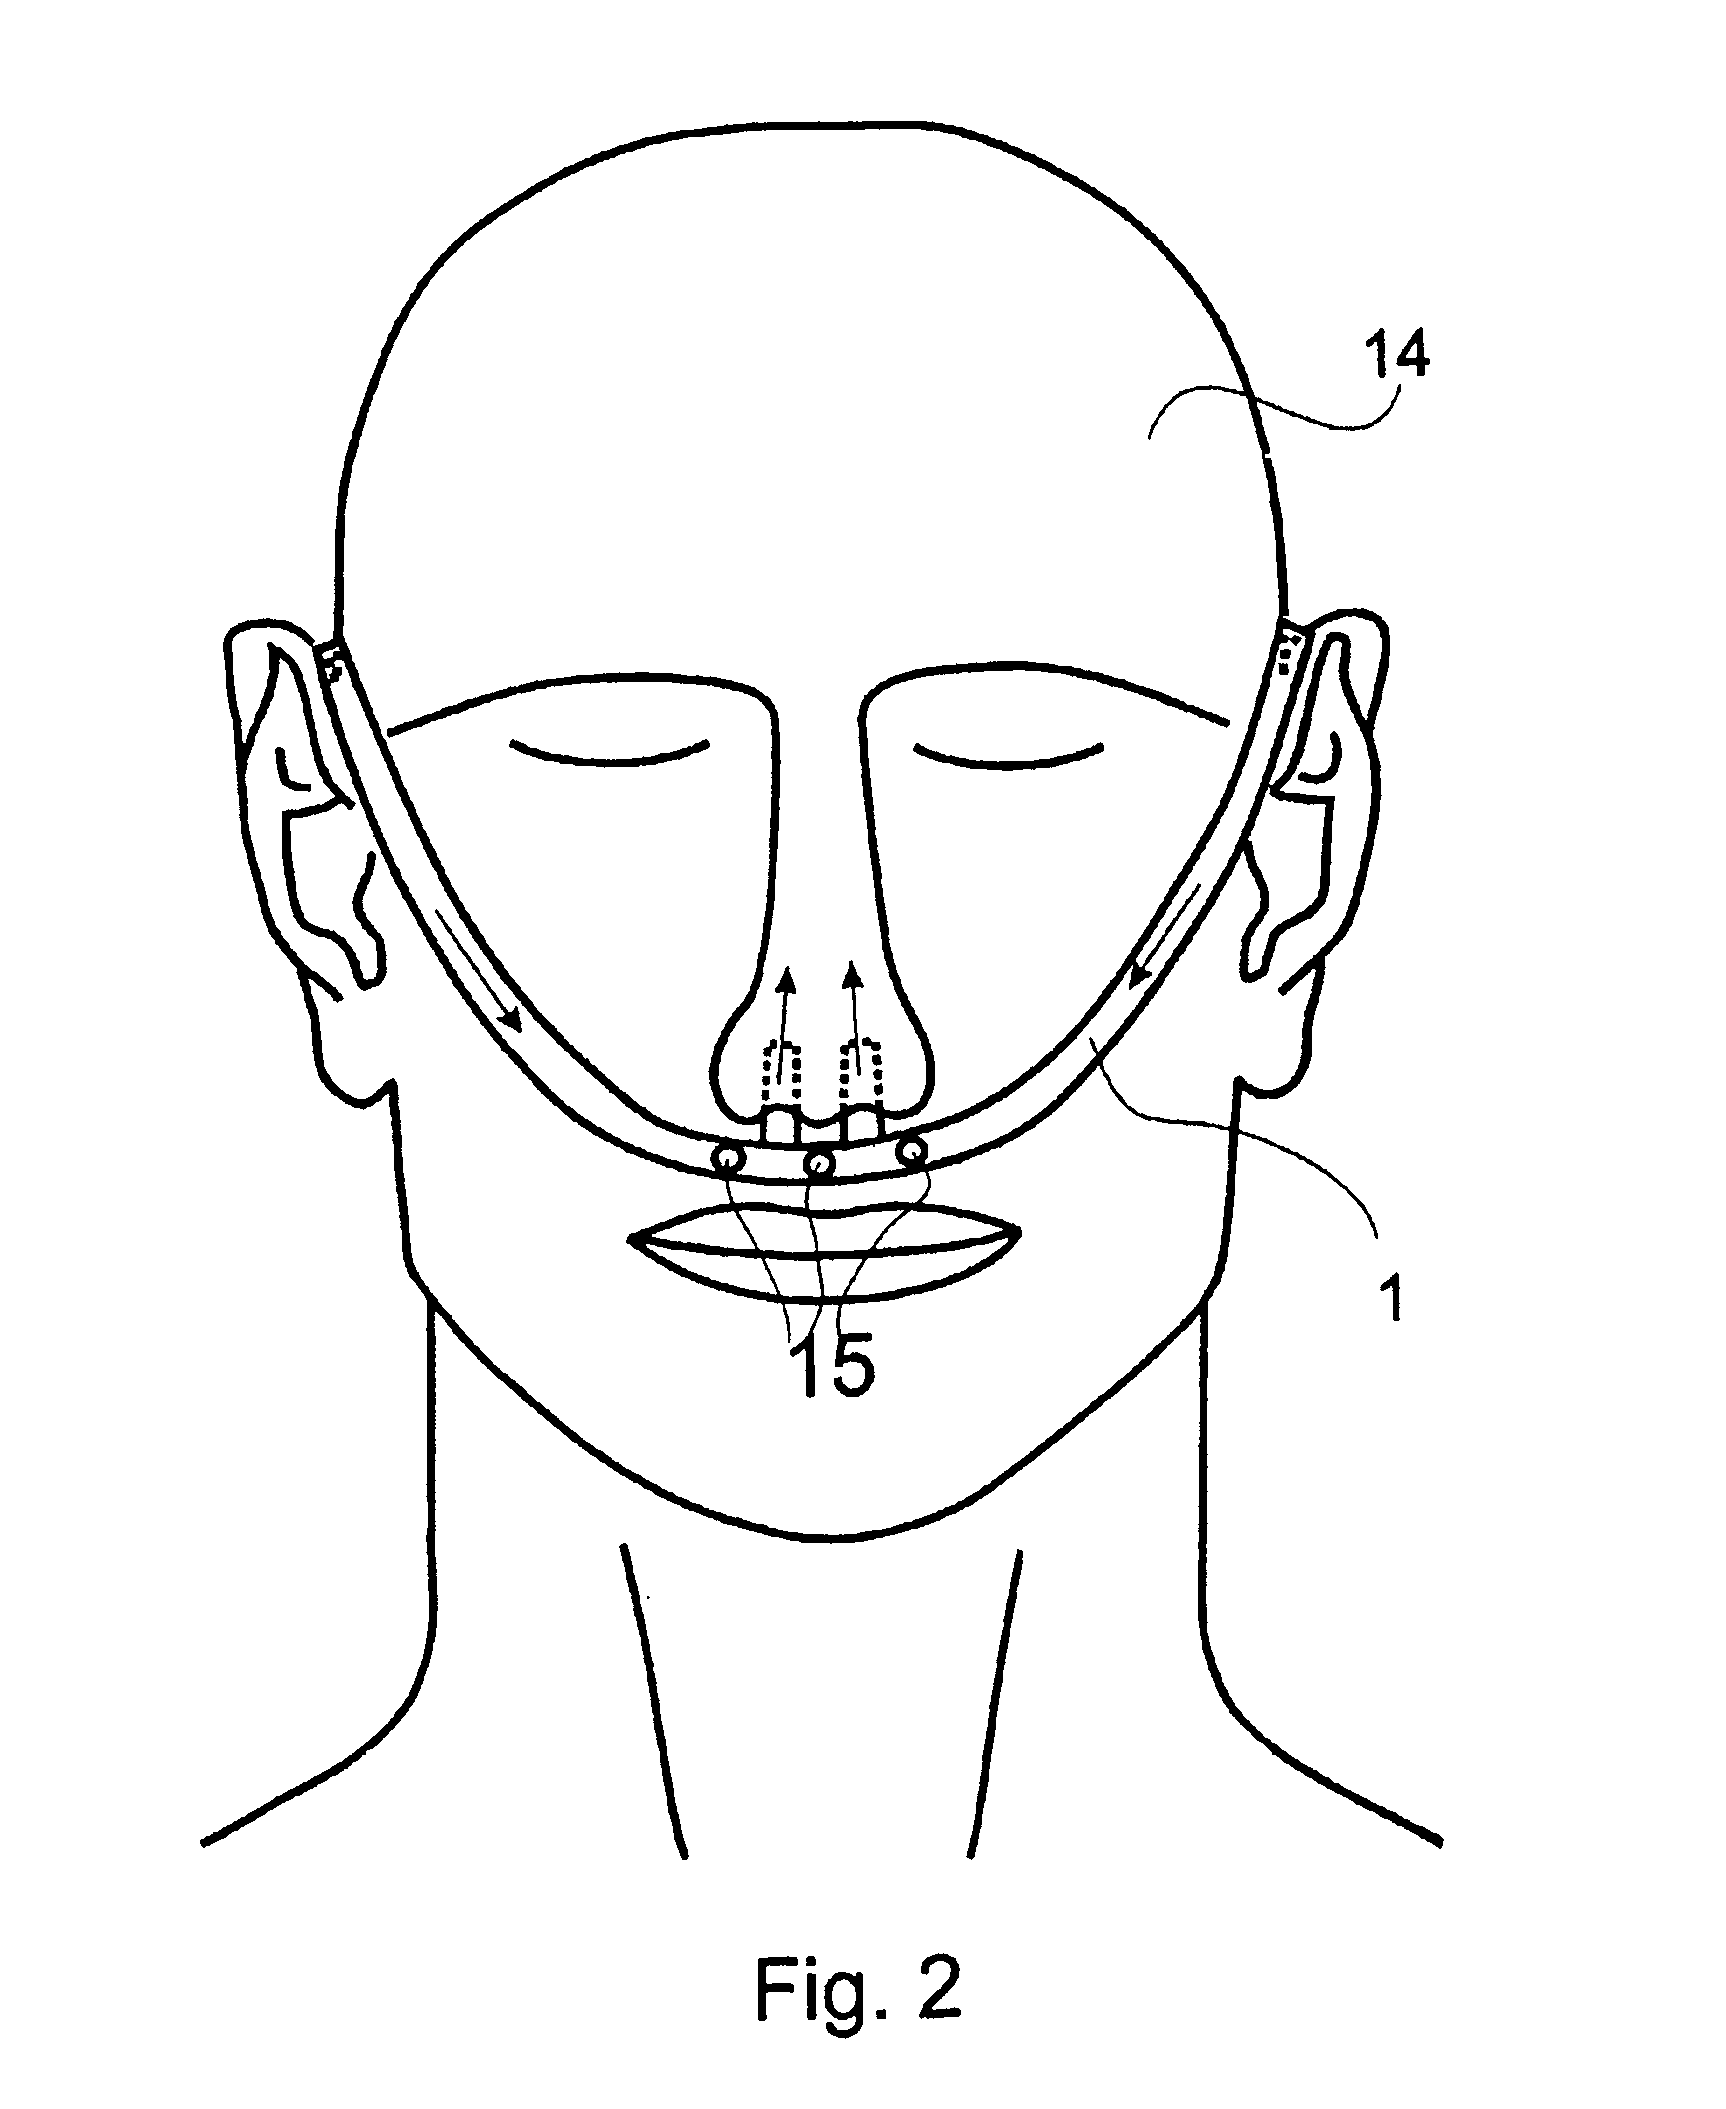 Anti-snoring device, method for reducing snoring, and a nasal air cannula